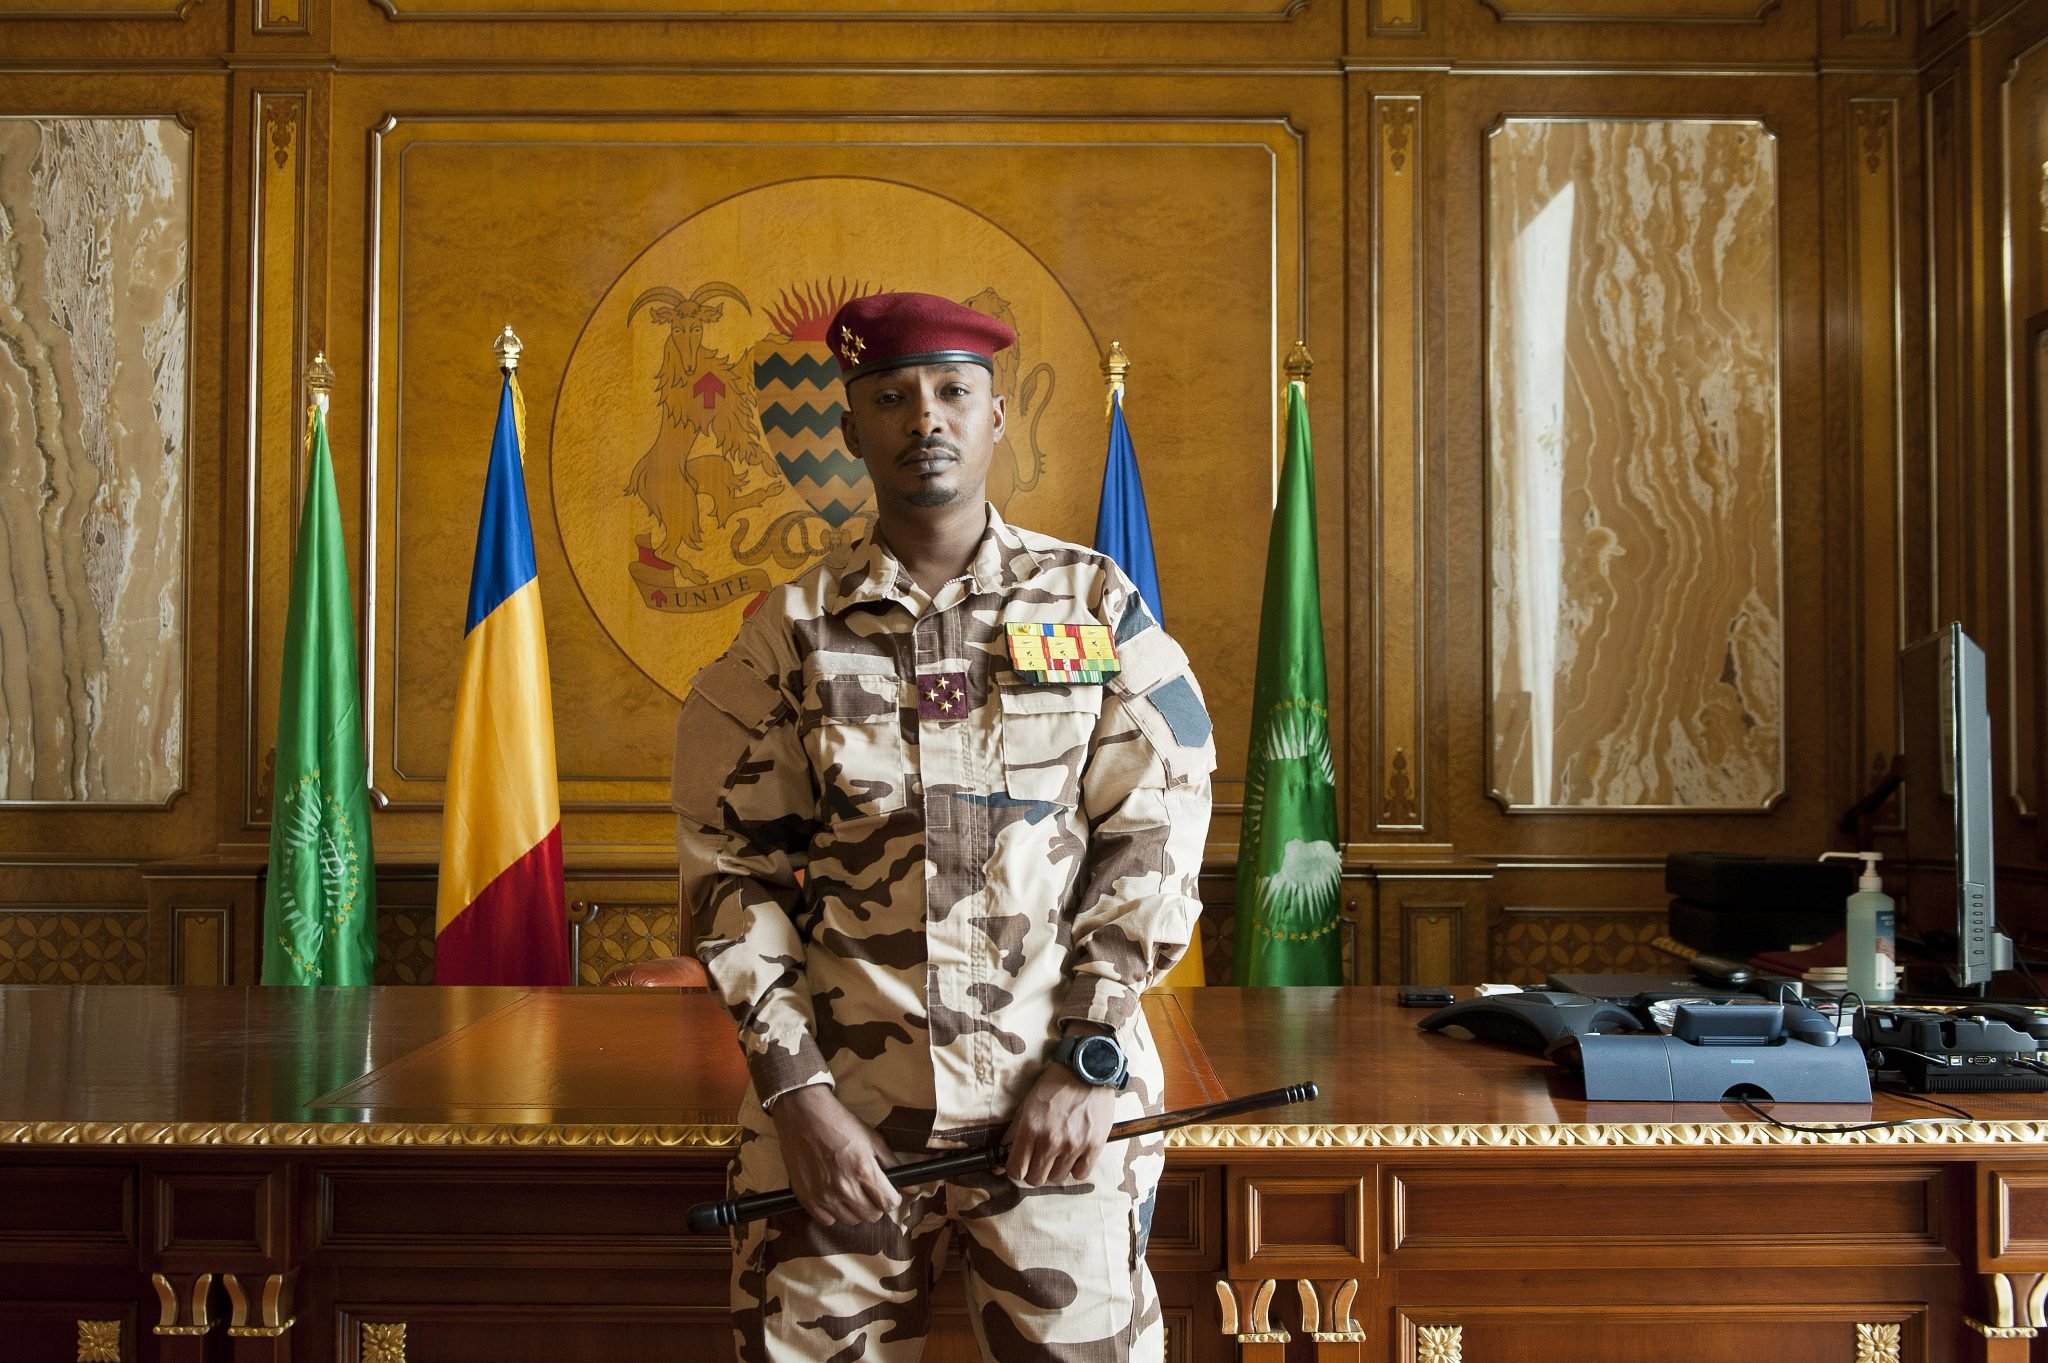 The Chadian junta has extended the transition period to democratic elections by two years, saying that Gen. Mahamat Idriss Déby Itno will remain in power.